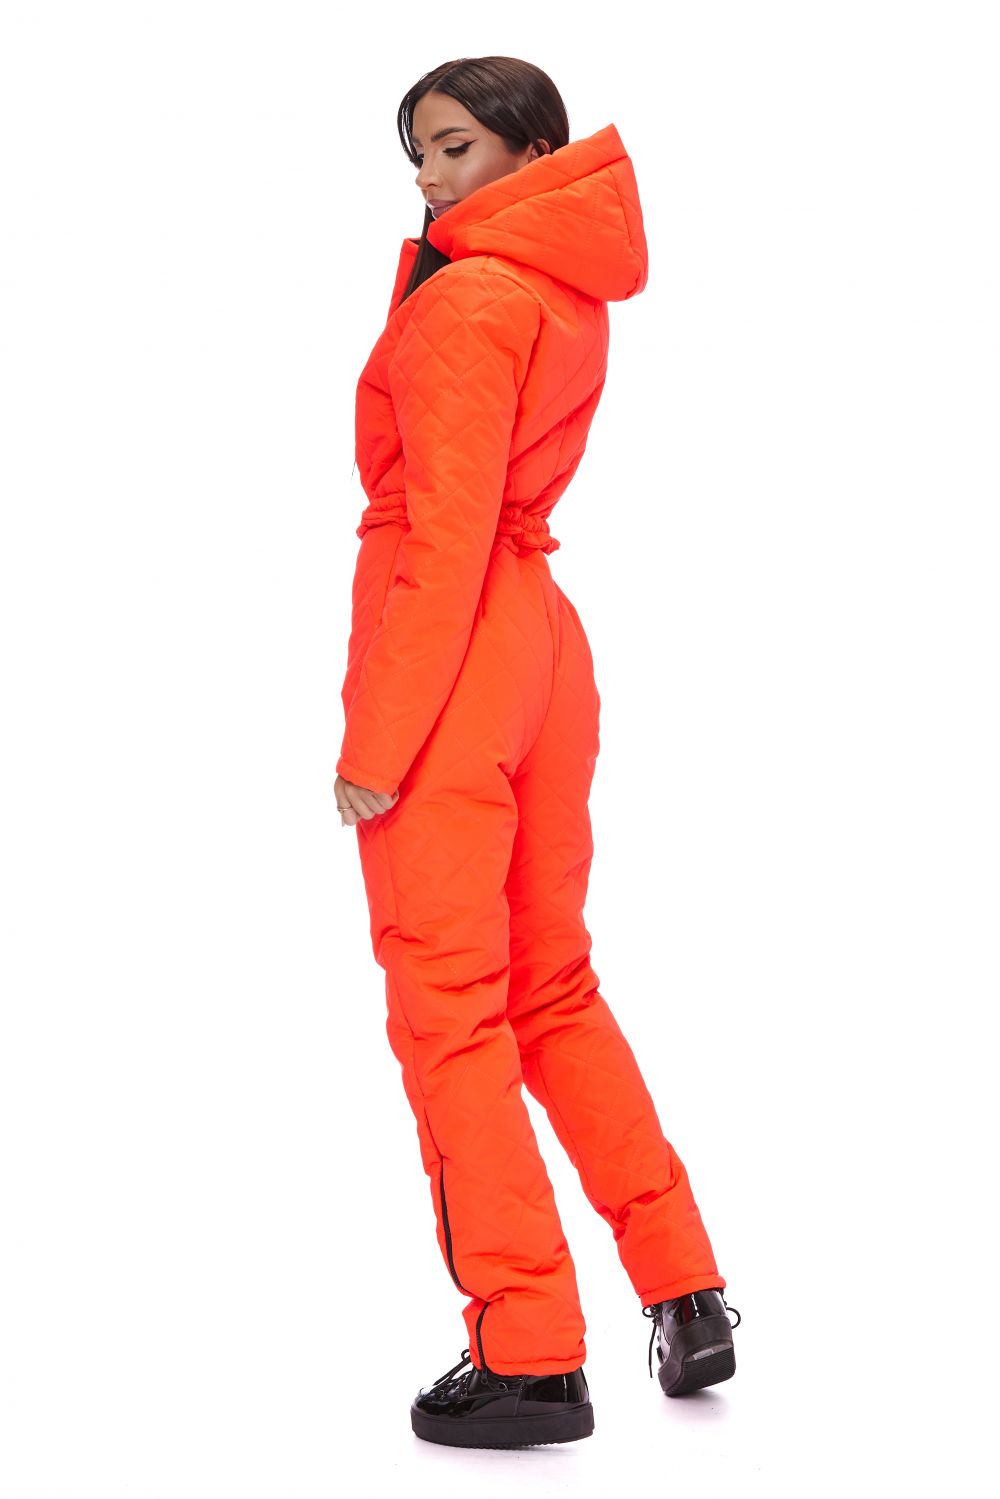 Coral Yvels Bogas casual ski jumpsuit